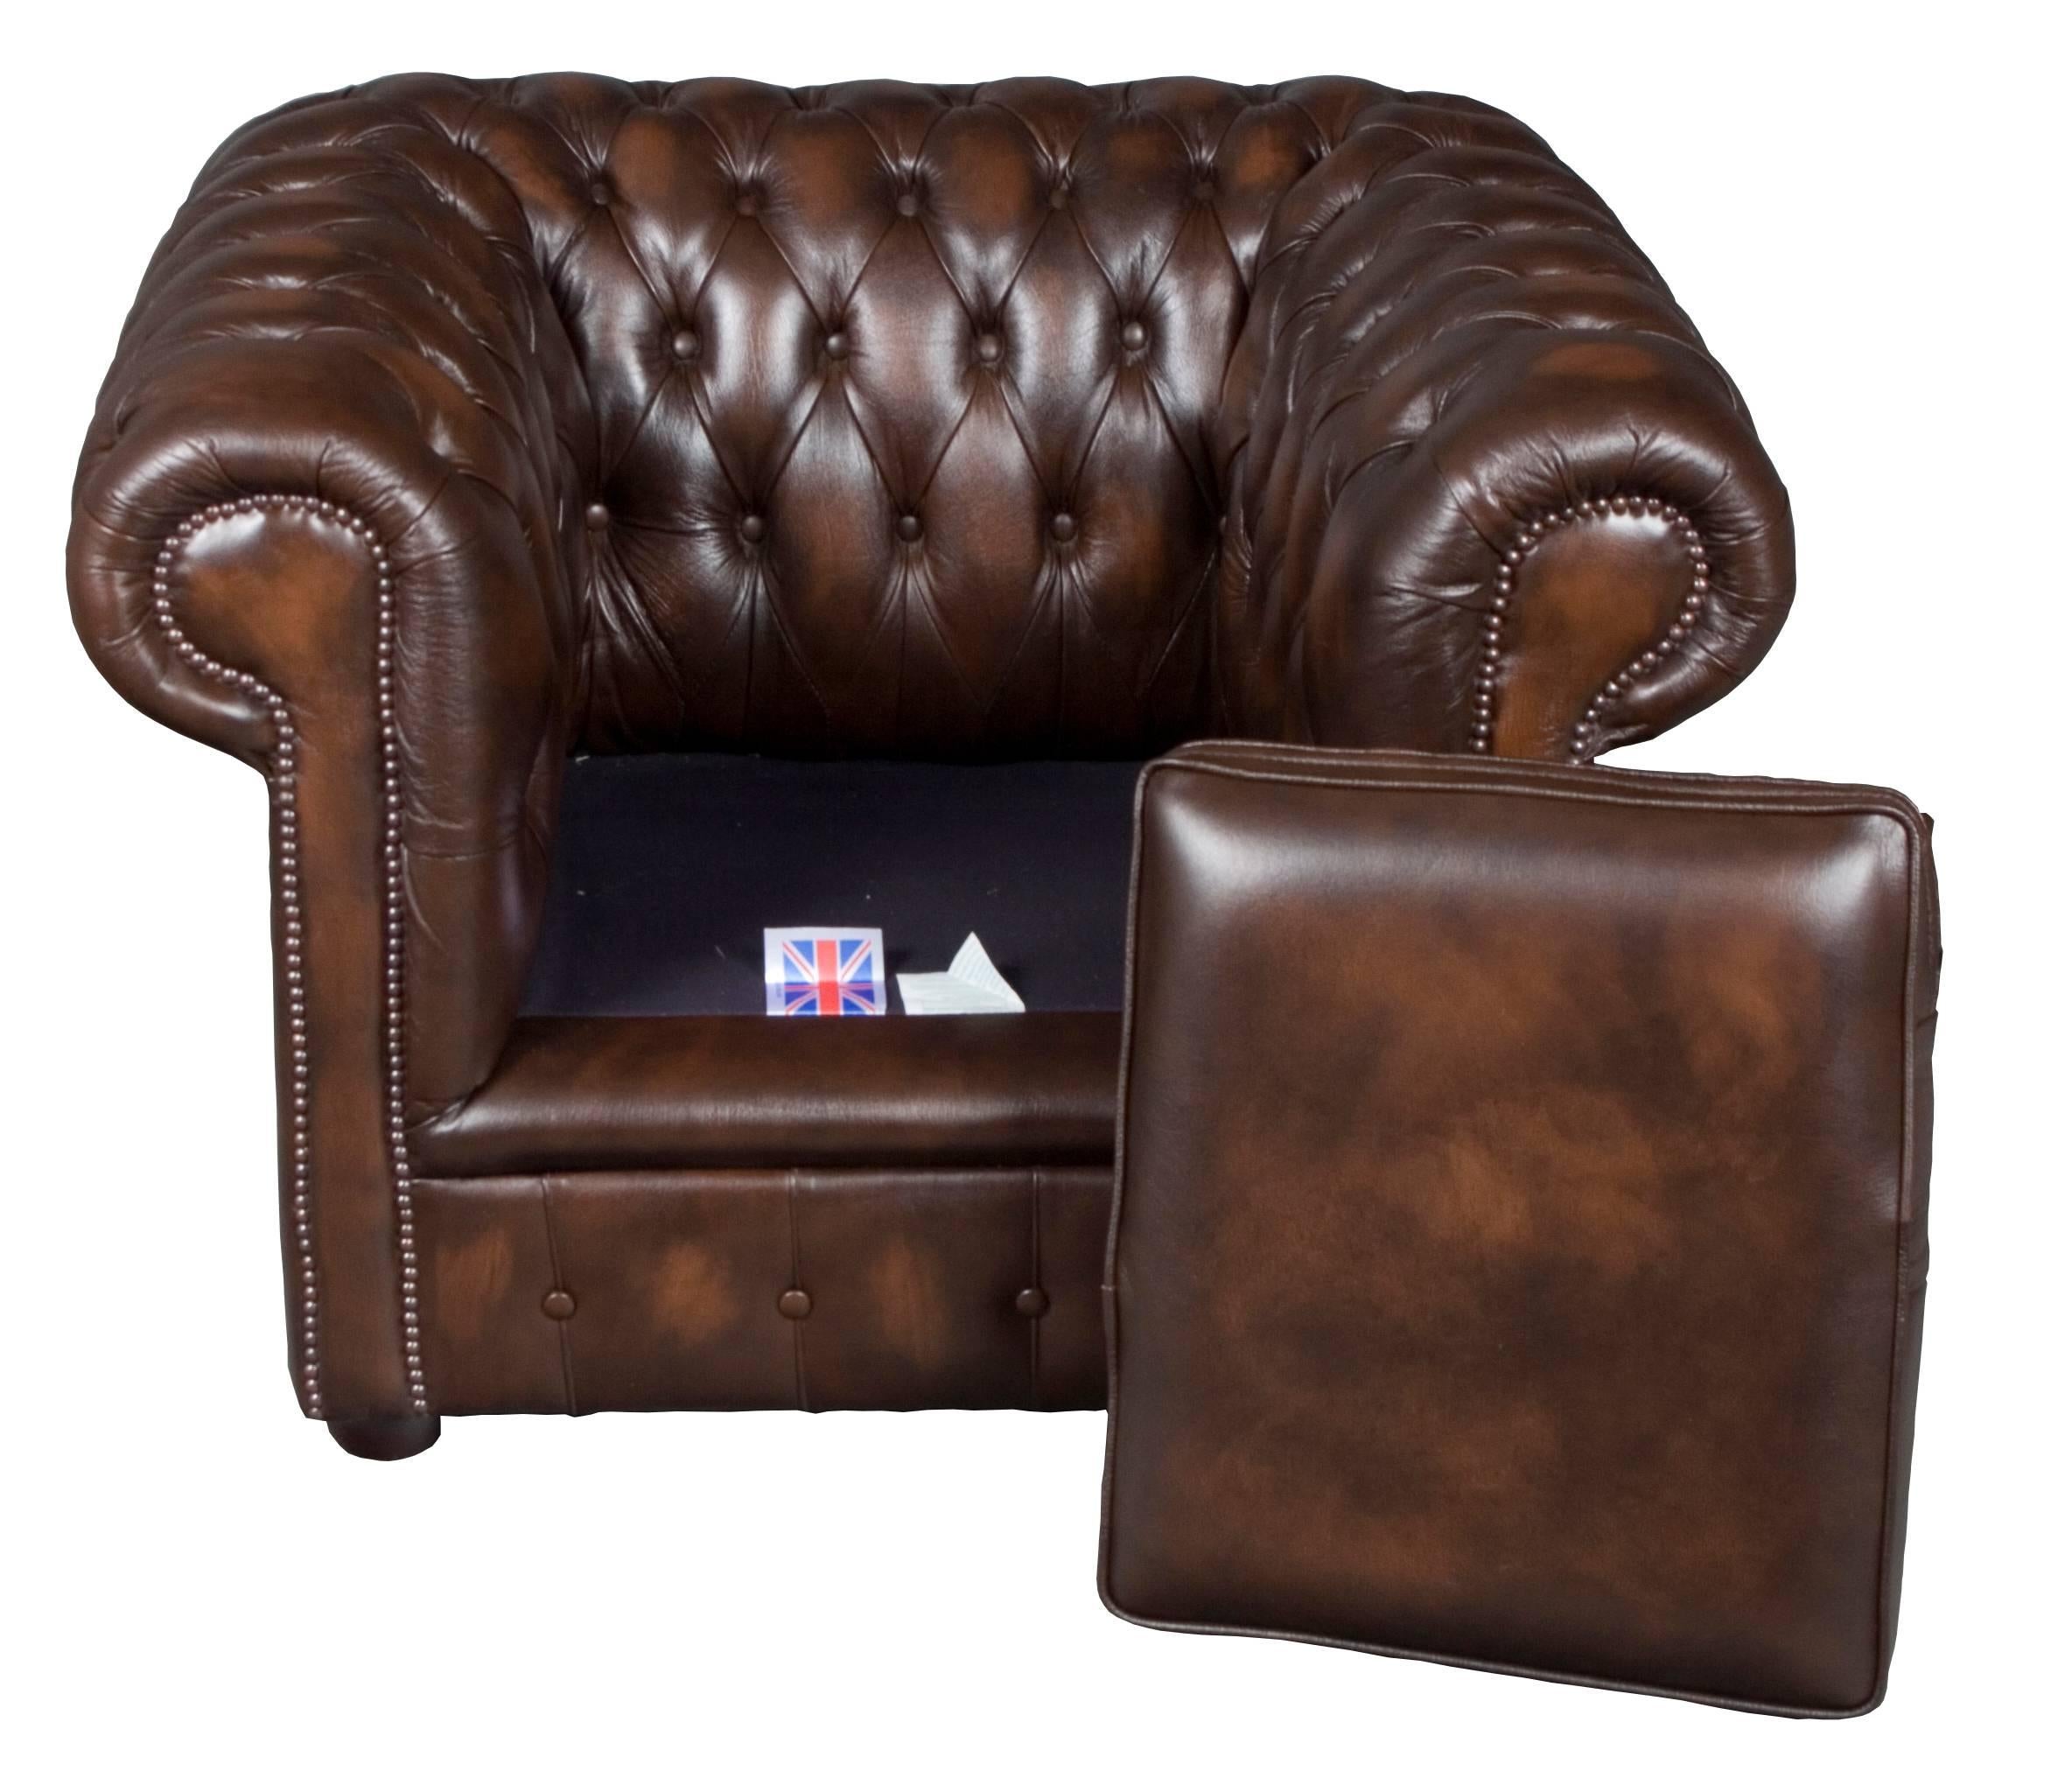 This gorgeous piece was made in England, circa 1980. It features beautiful tufted brown genuine, semi-aniline dyed leather and a sturdy hardwood frame.
The leather on this vintage club chair has darker and lighter tones of brown that seamlessly